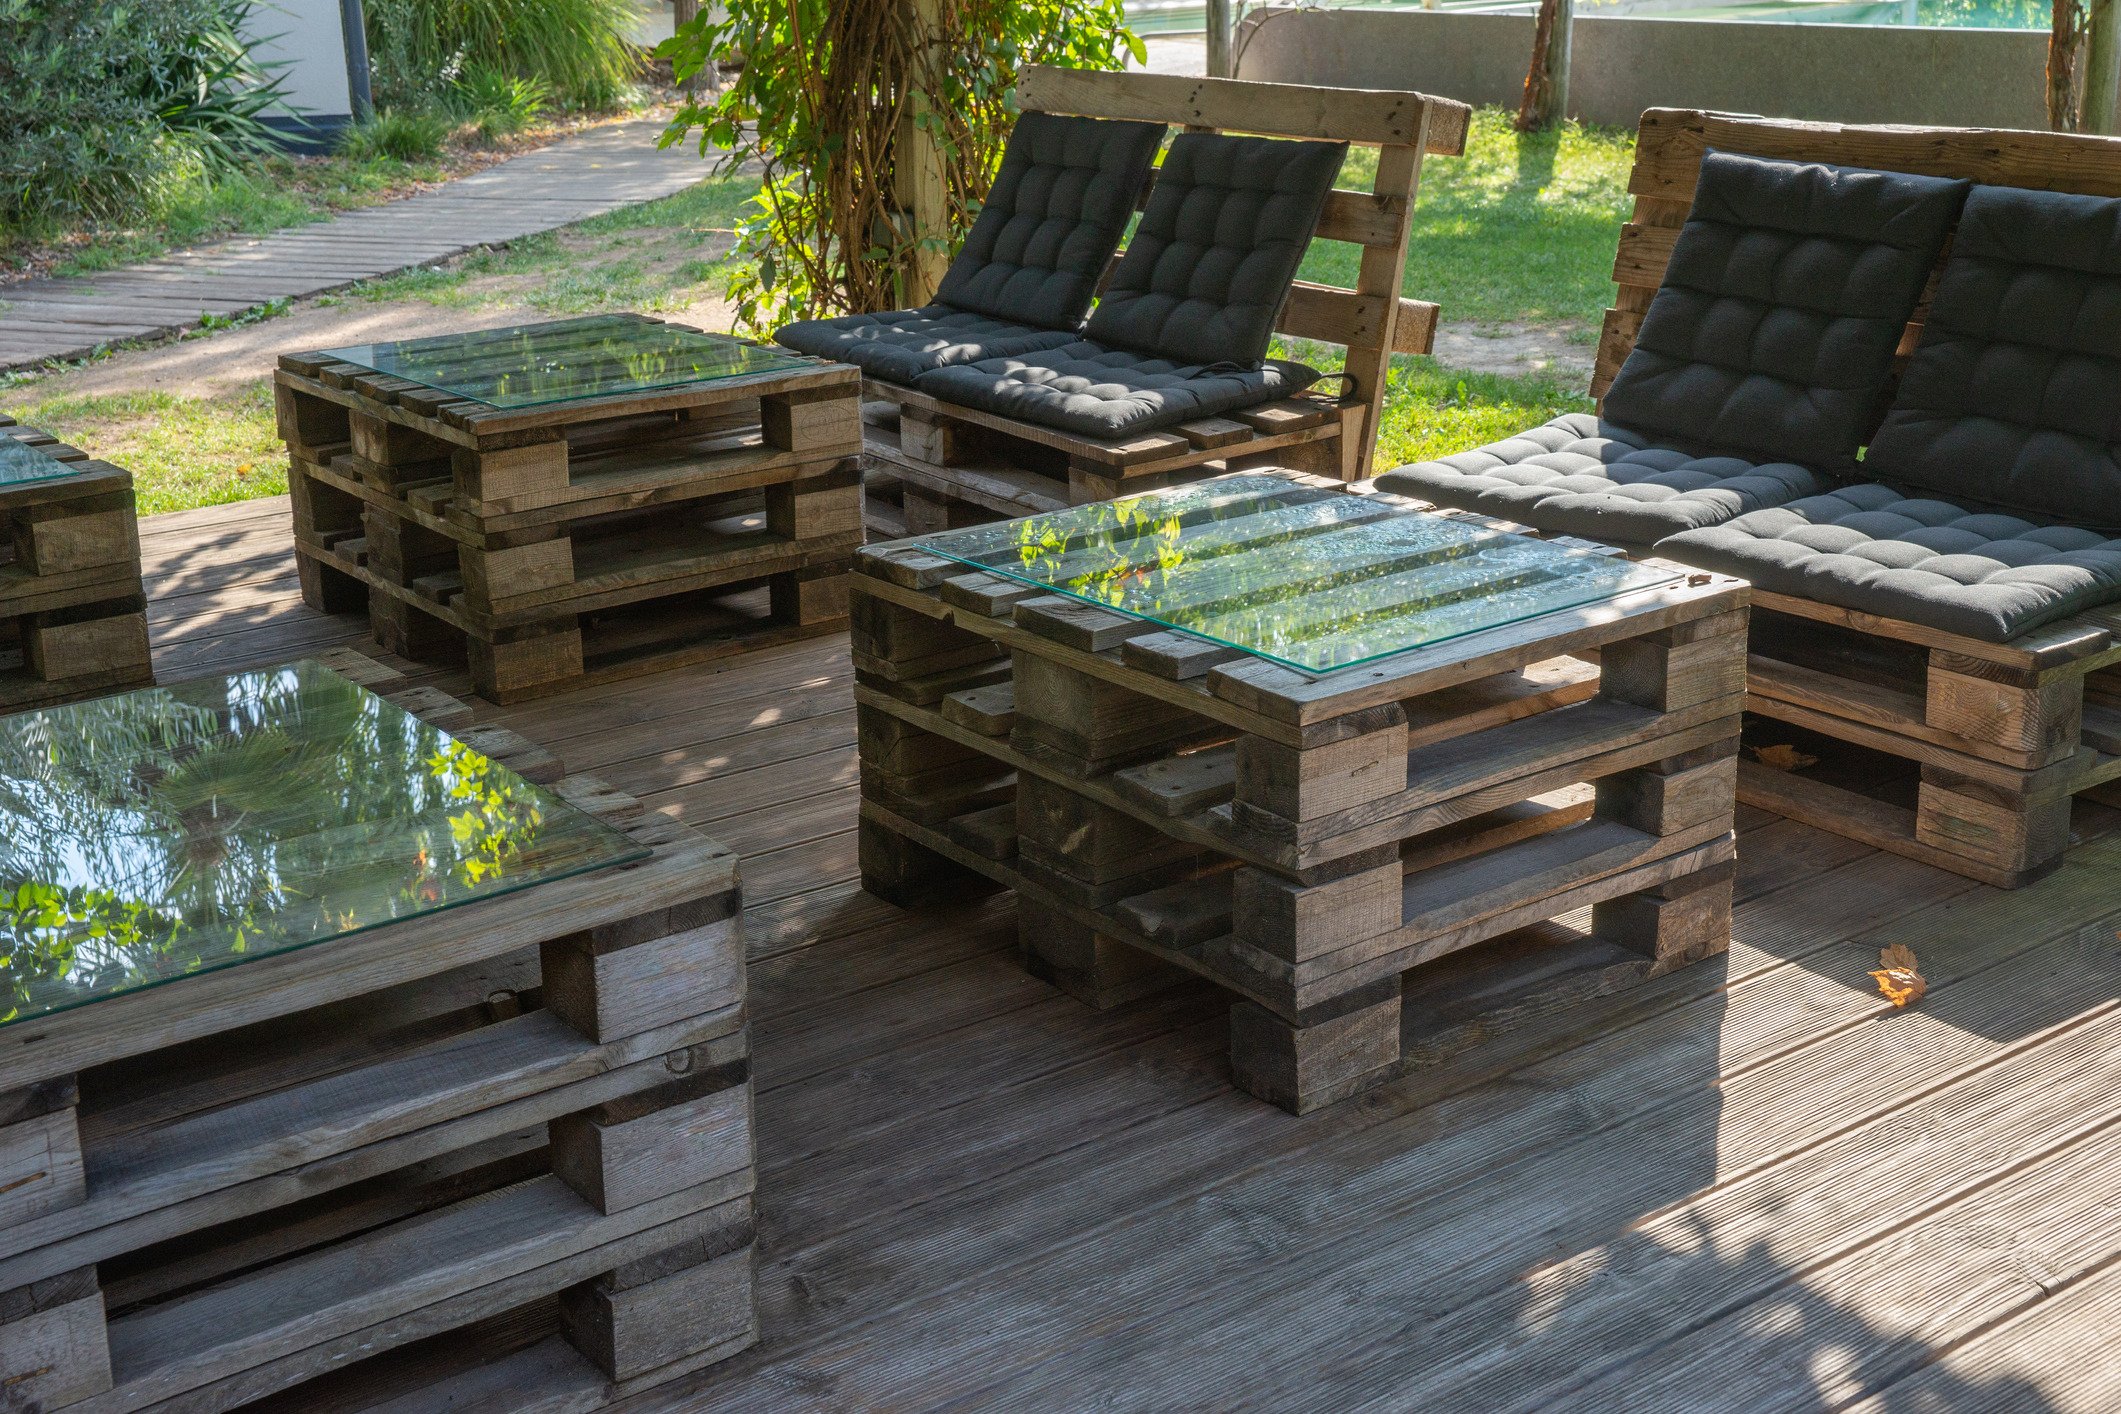 Garden table made from pallets